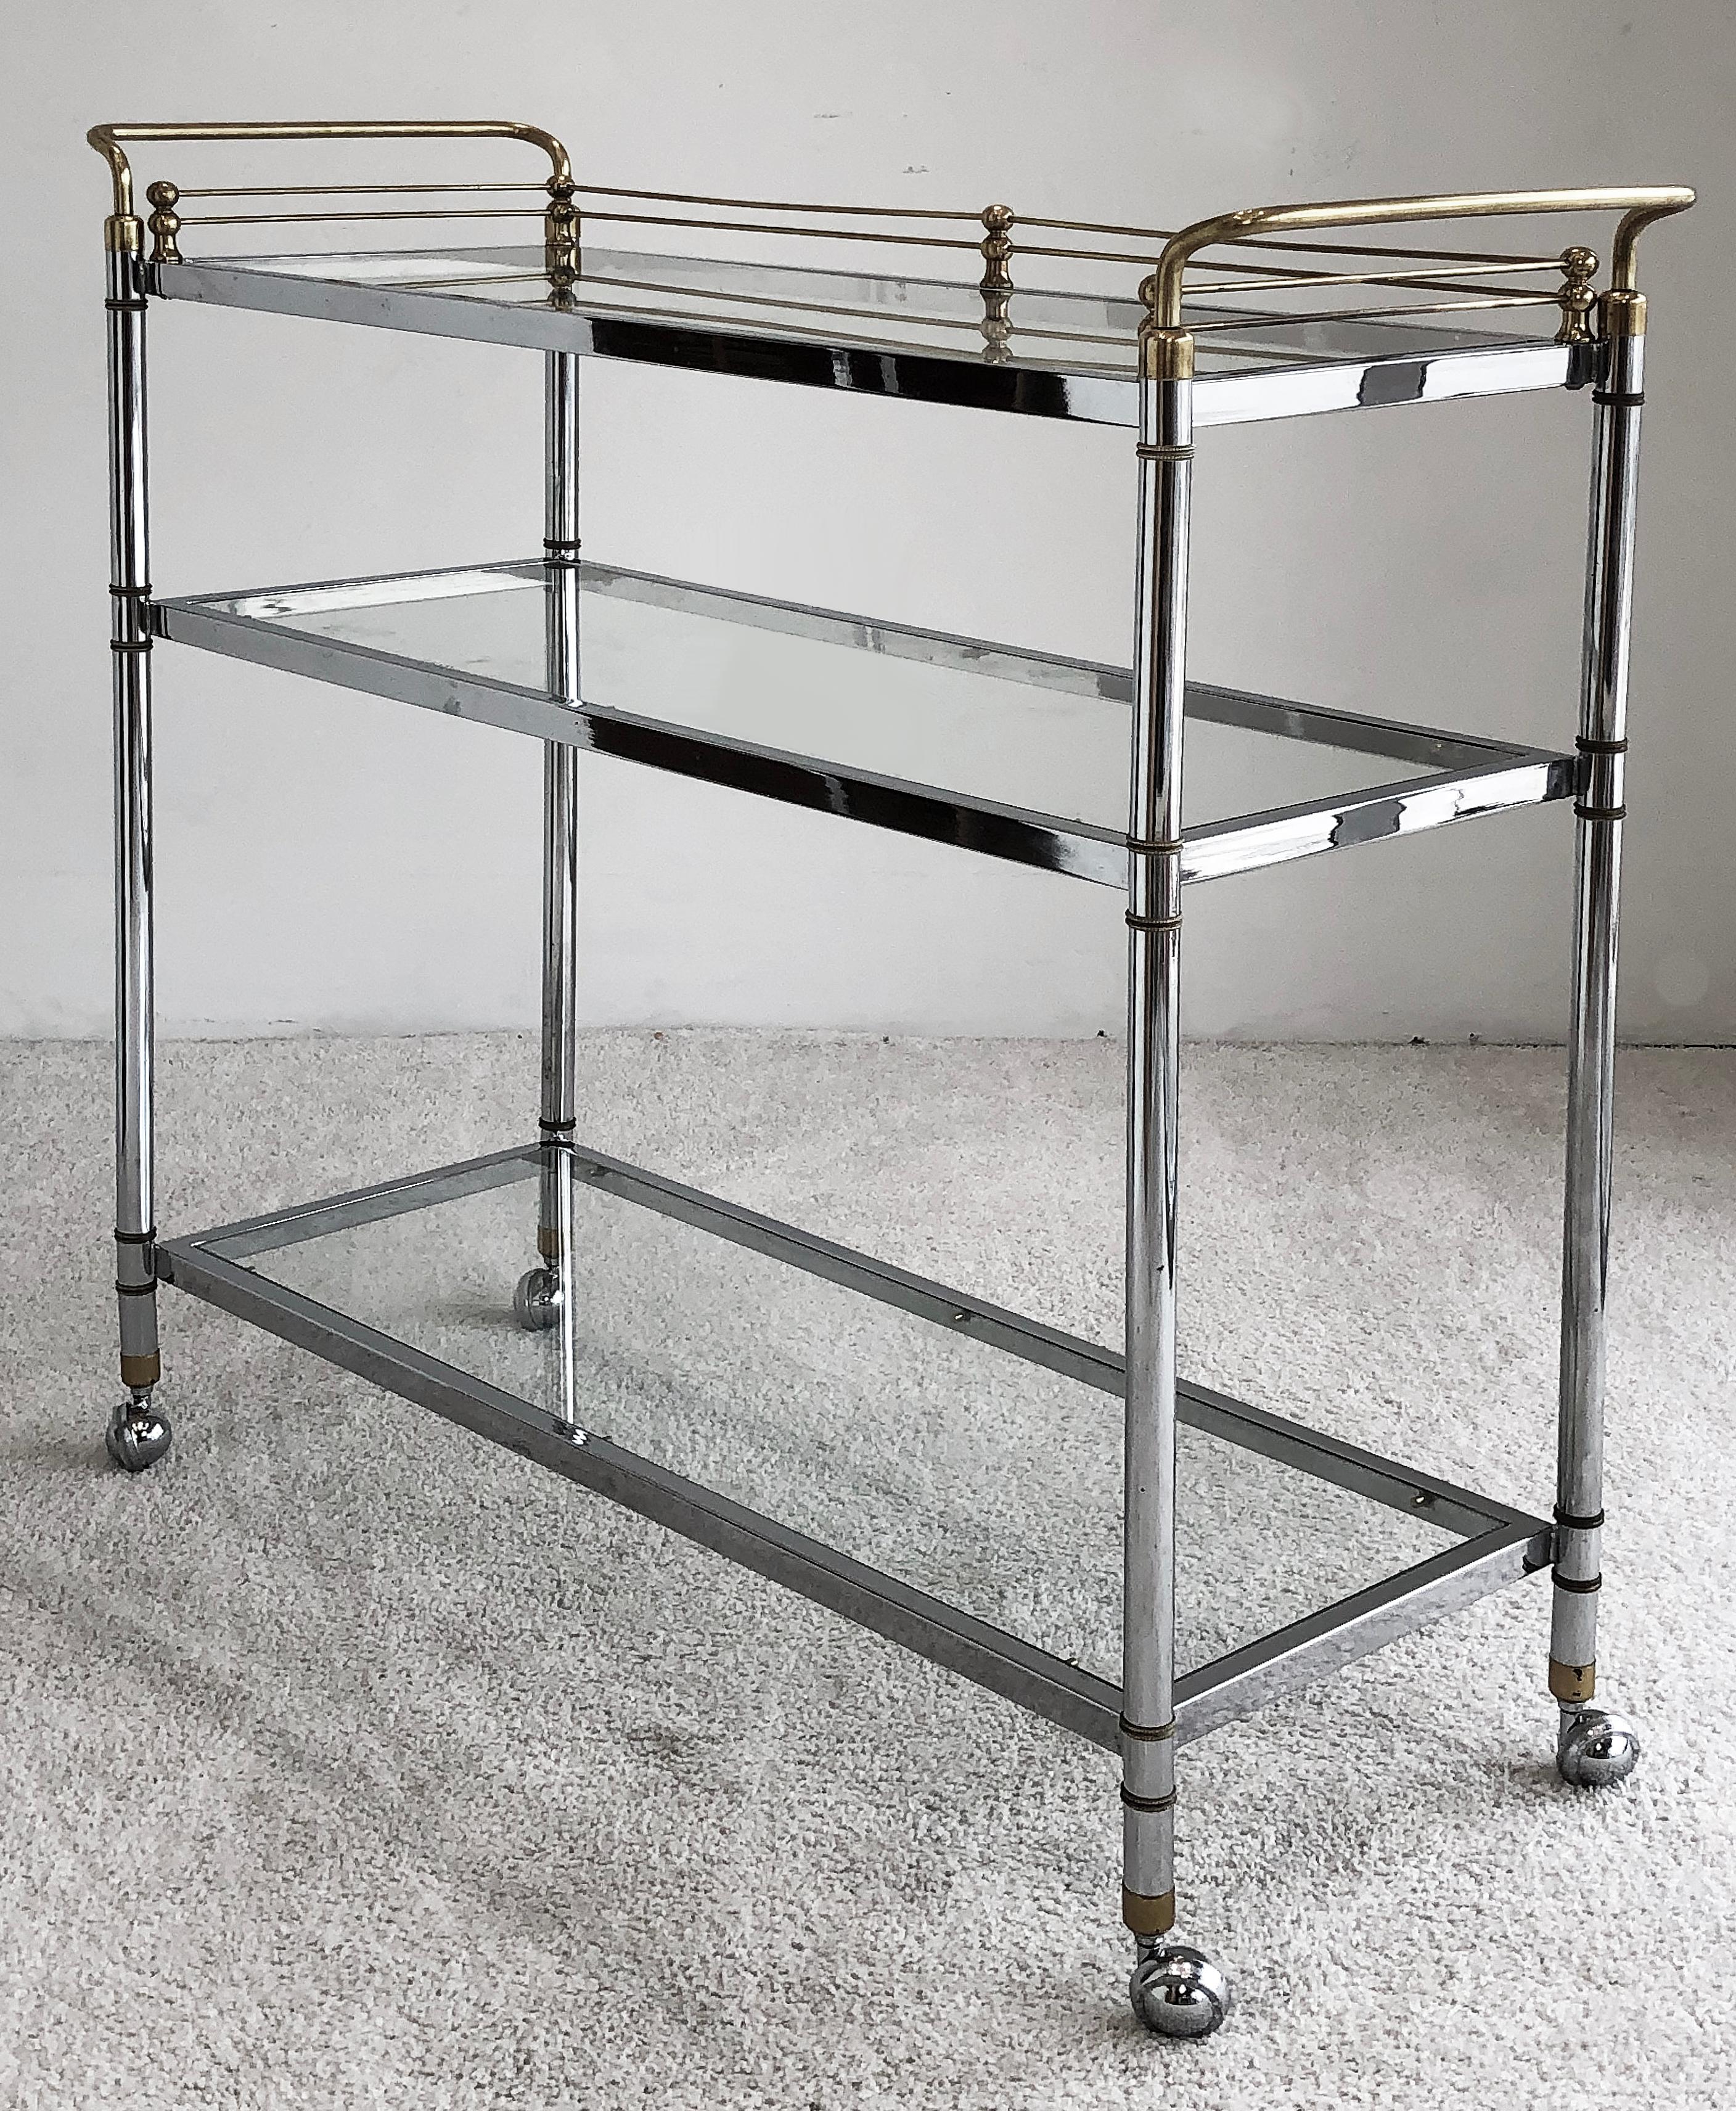 Midcentury chrome/brass Maison Jansen style bar cart 

Offered for sale is an elegant 1970s rolling Maison Jansen style bar cart in chrome and brass. The cart has 3 glass shelves providing ample storage. Because the cart has been designed with the